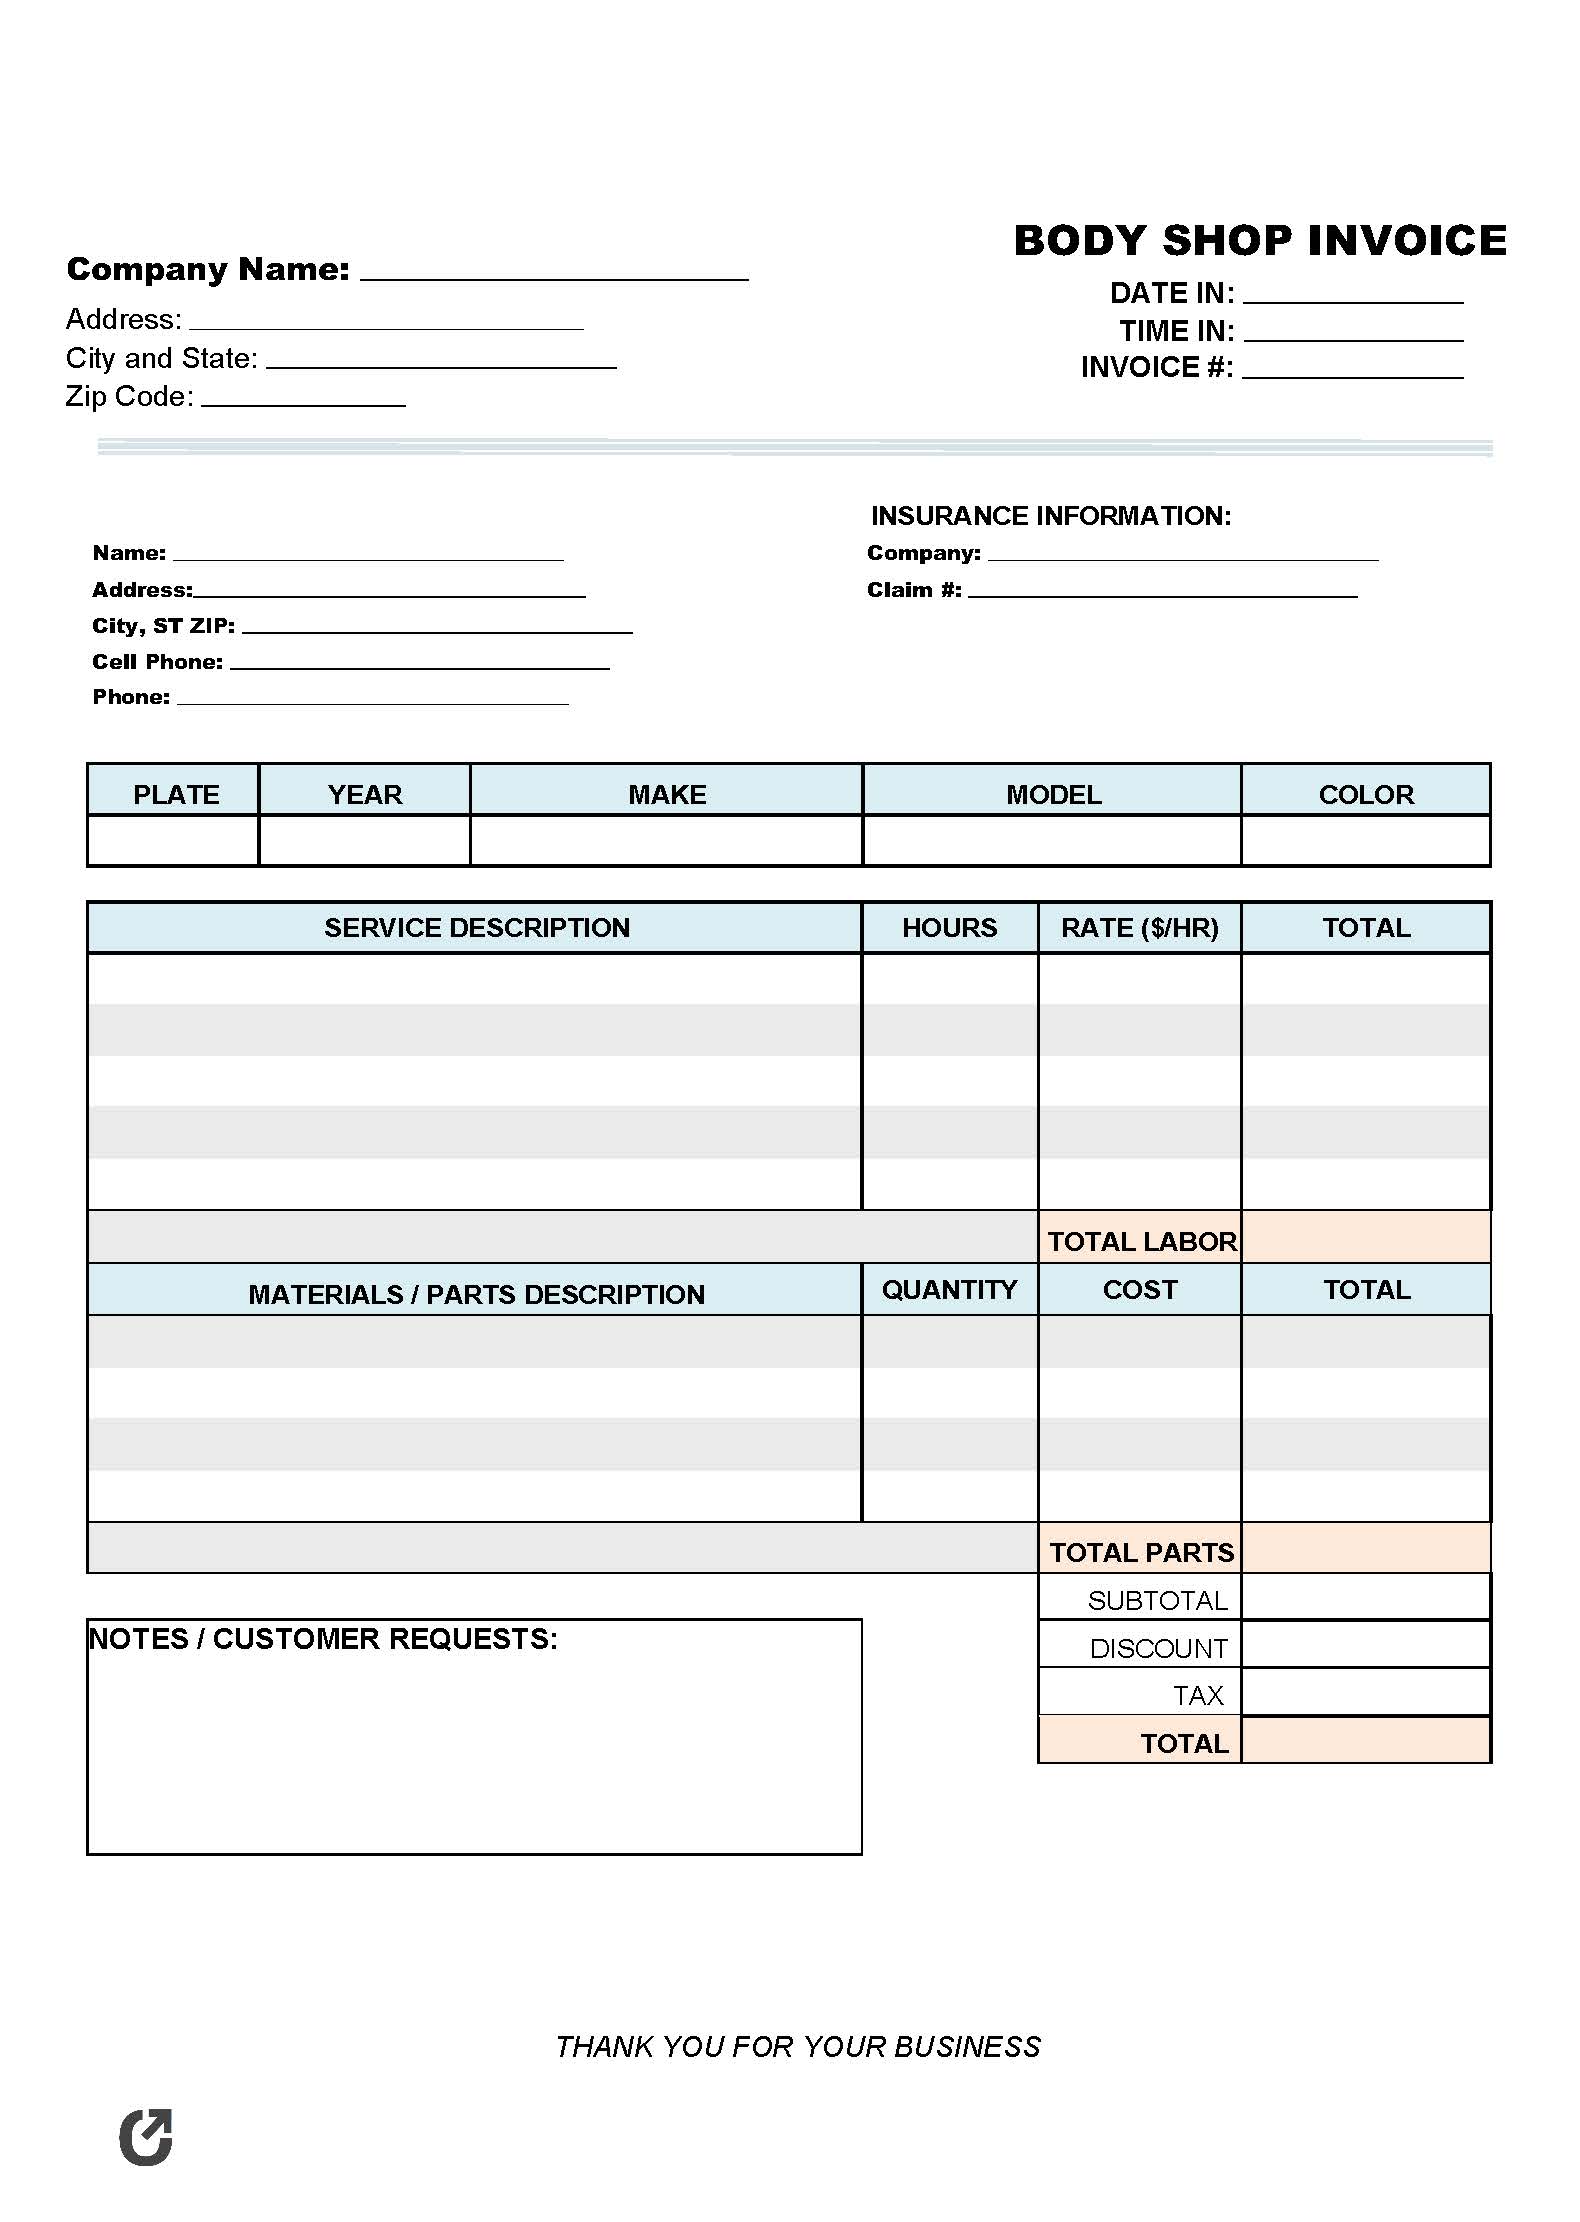 Free Body Shop Invoice Template  PDF  WORD  EXCEL With Regard To Itemized Invoice Template